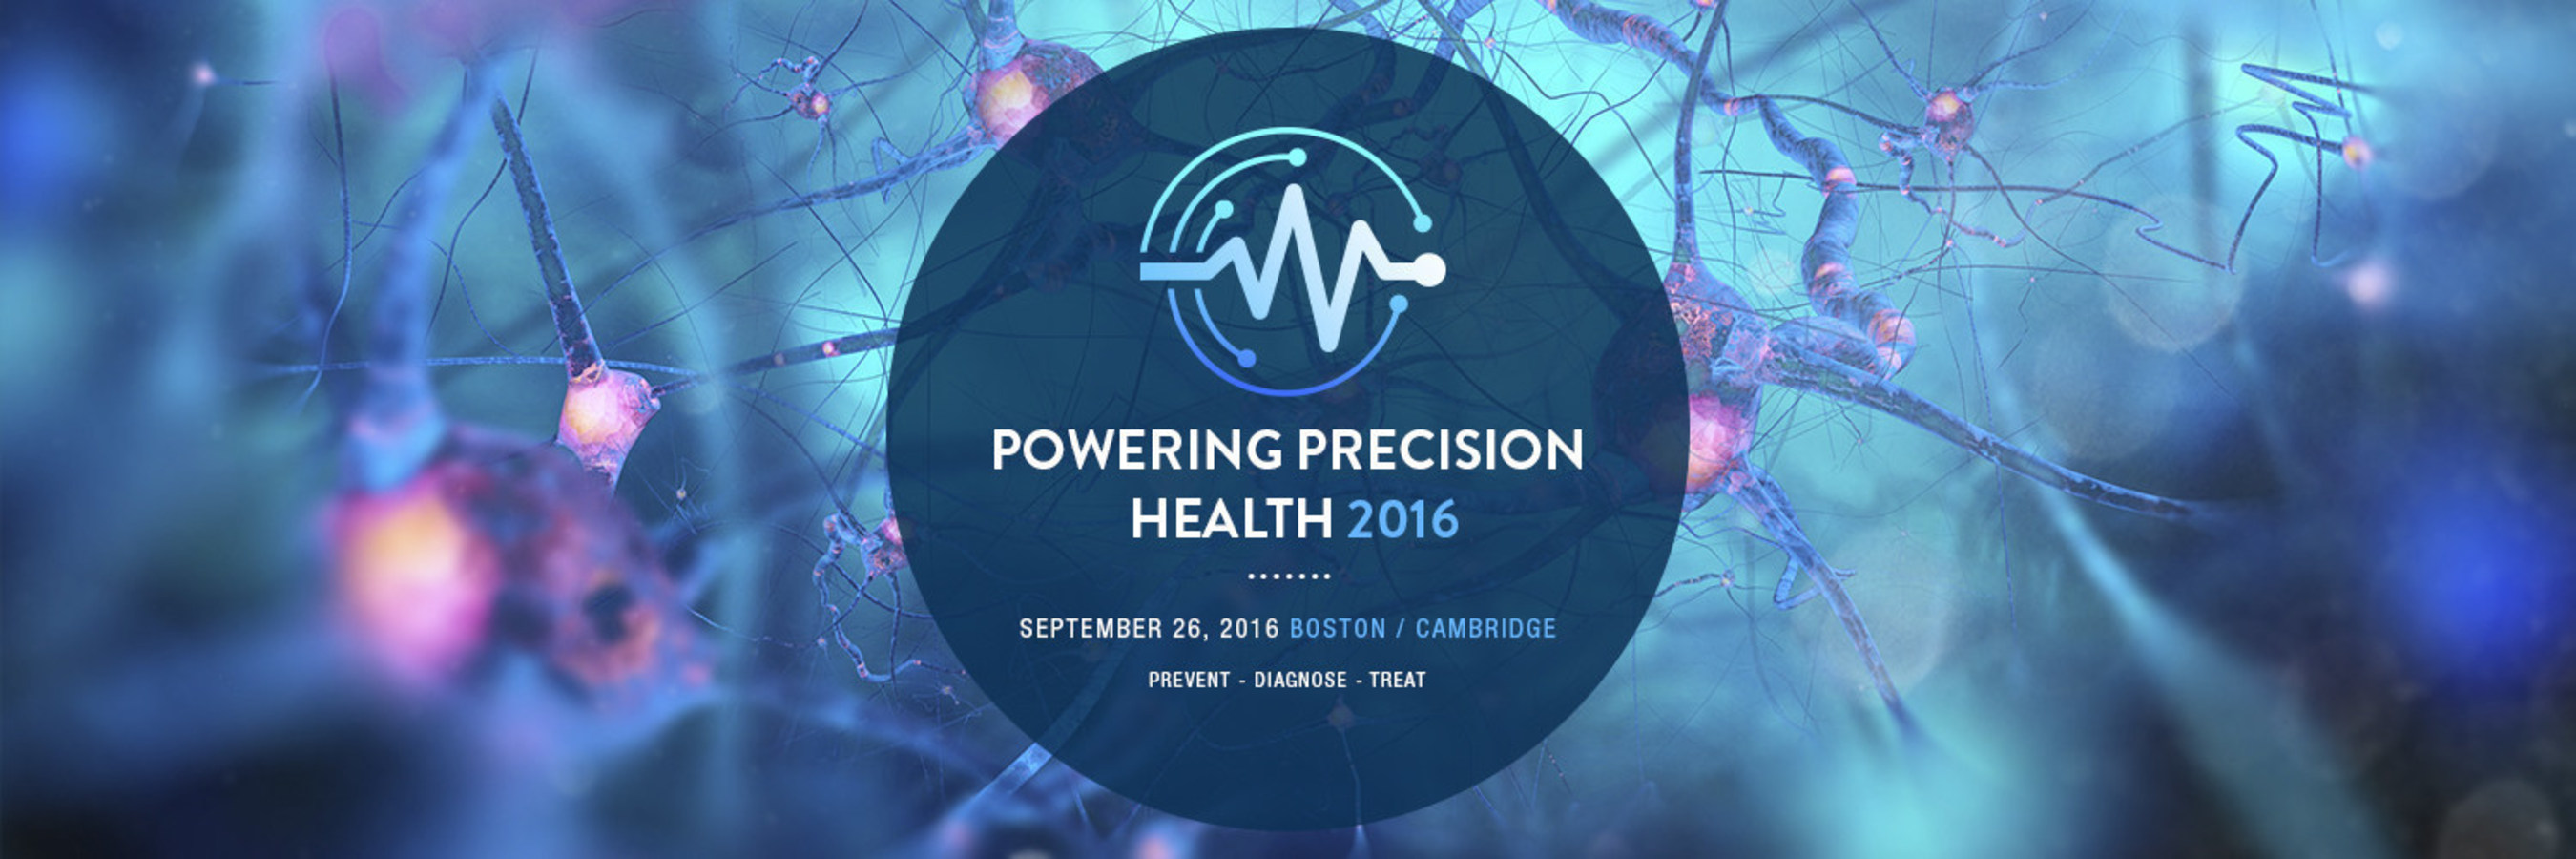 Governor Baker Issues Proclamation for Precision Health Awareness Week